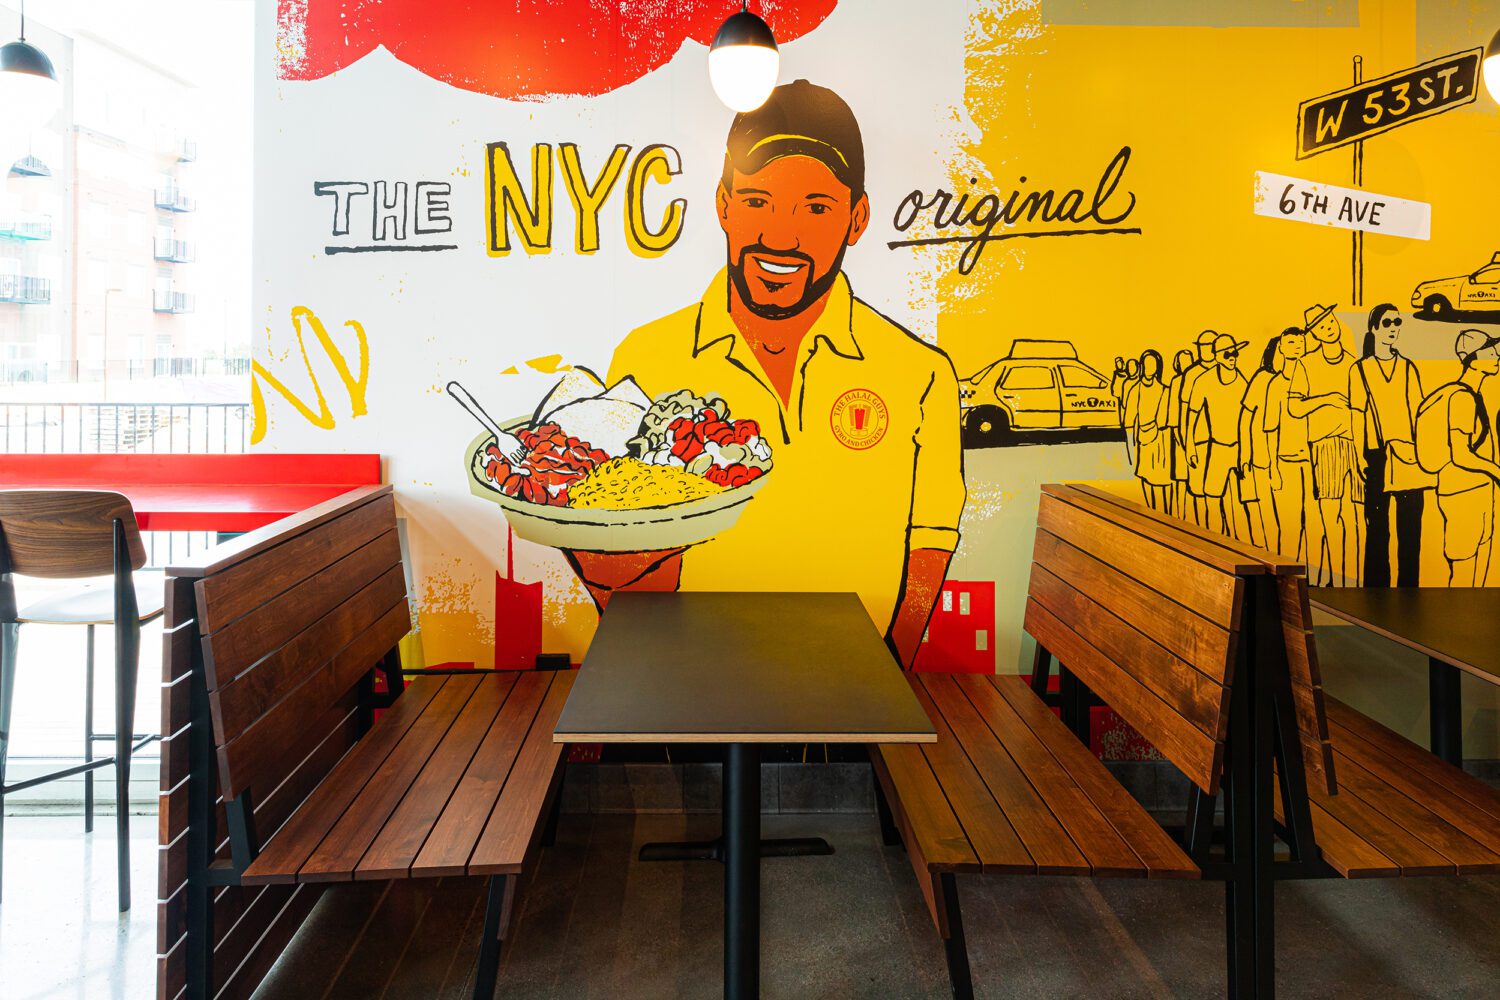 The Halal Guys gives sneak peek of redesign